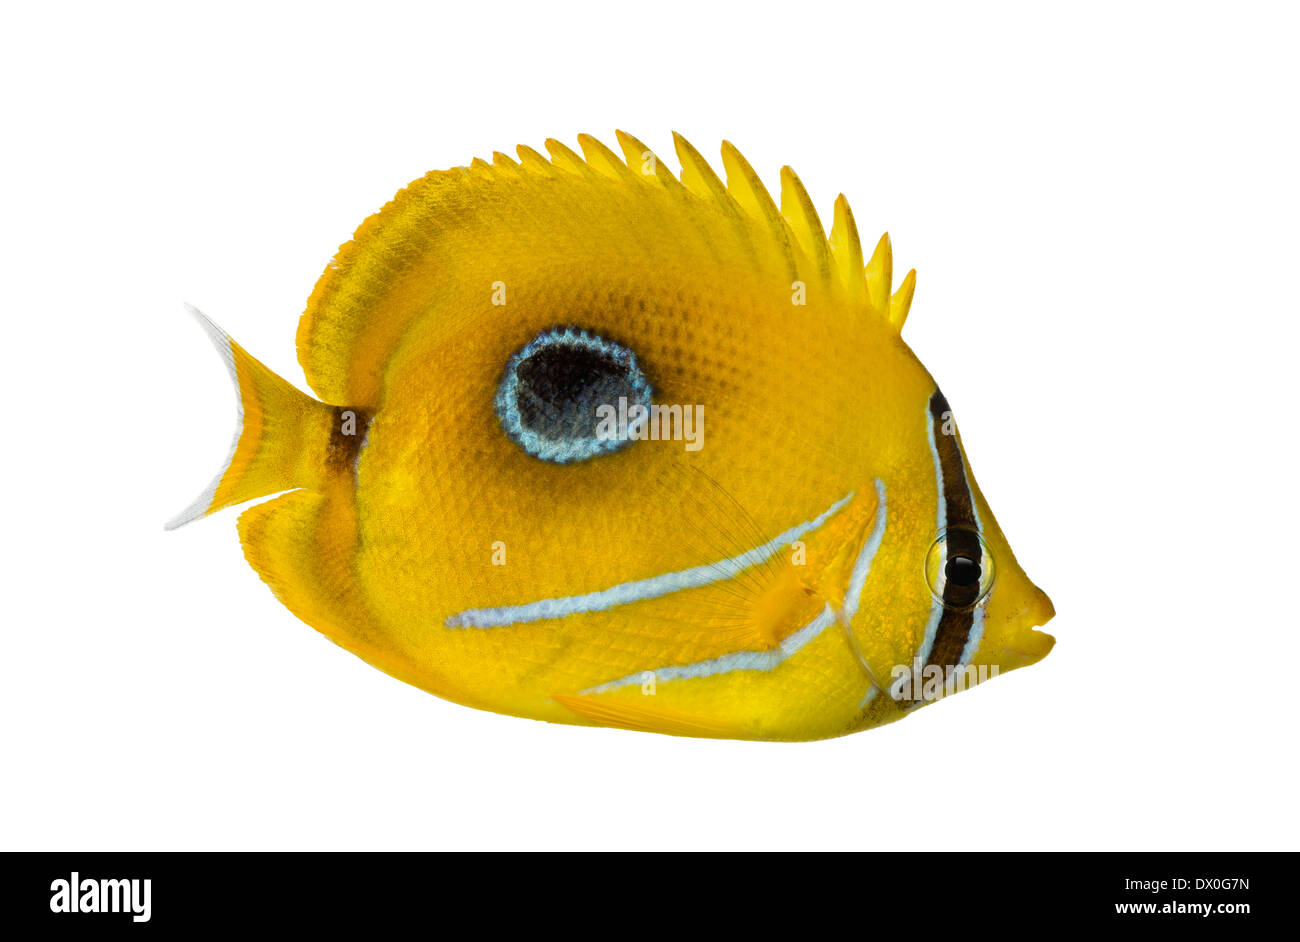 Side view of a Bluelashed butterflyfish, Chaetodon bennetti, against white background Stock Photo